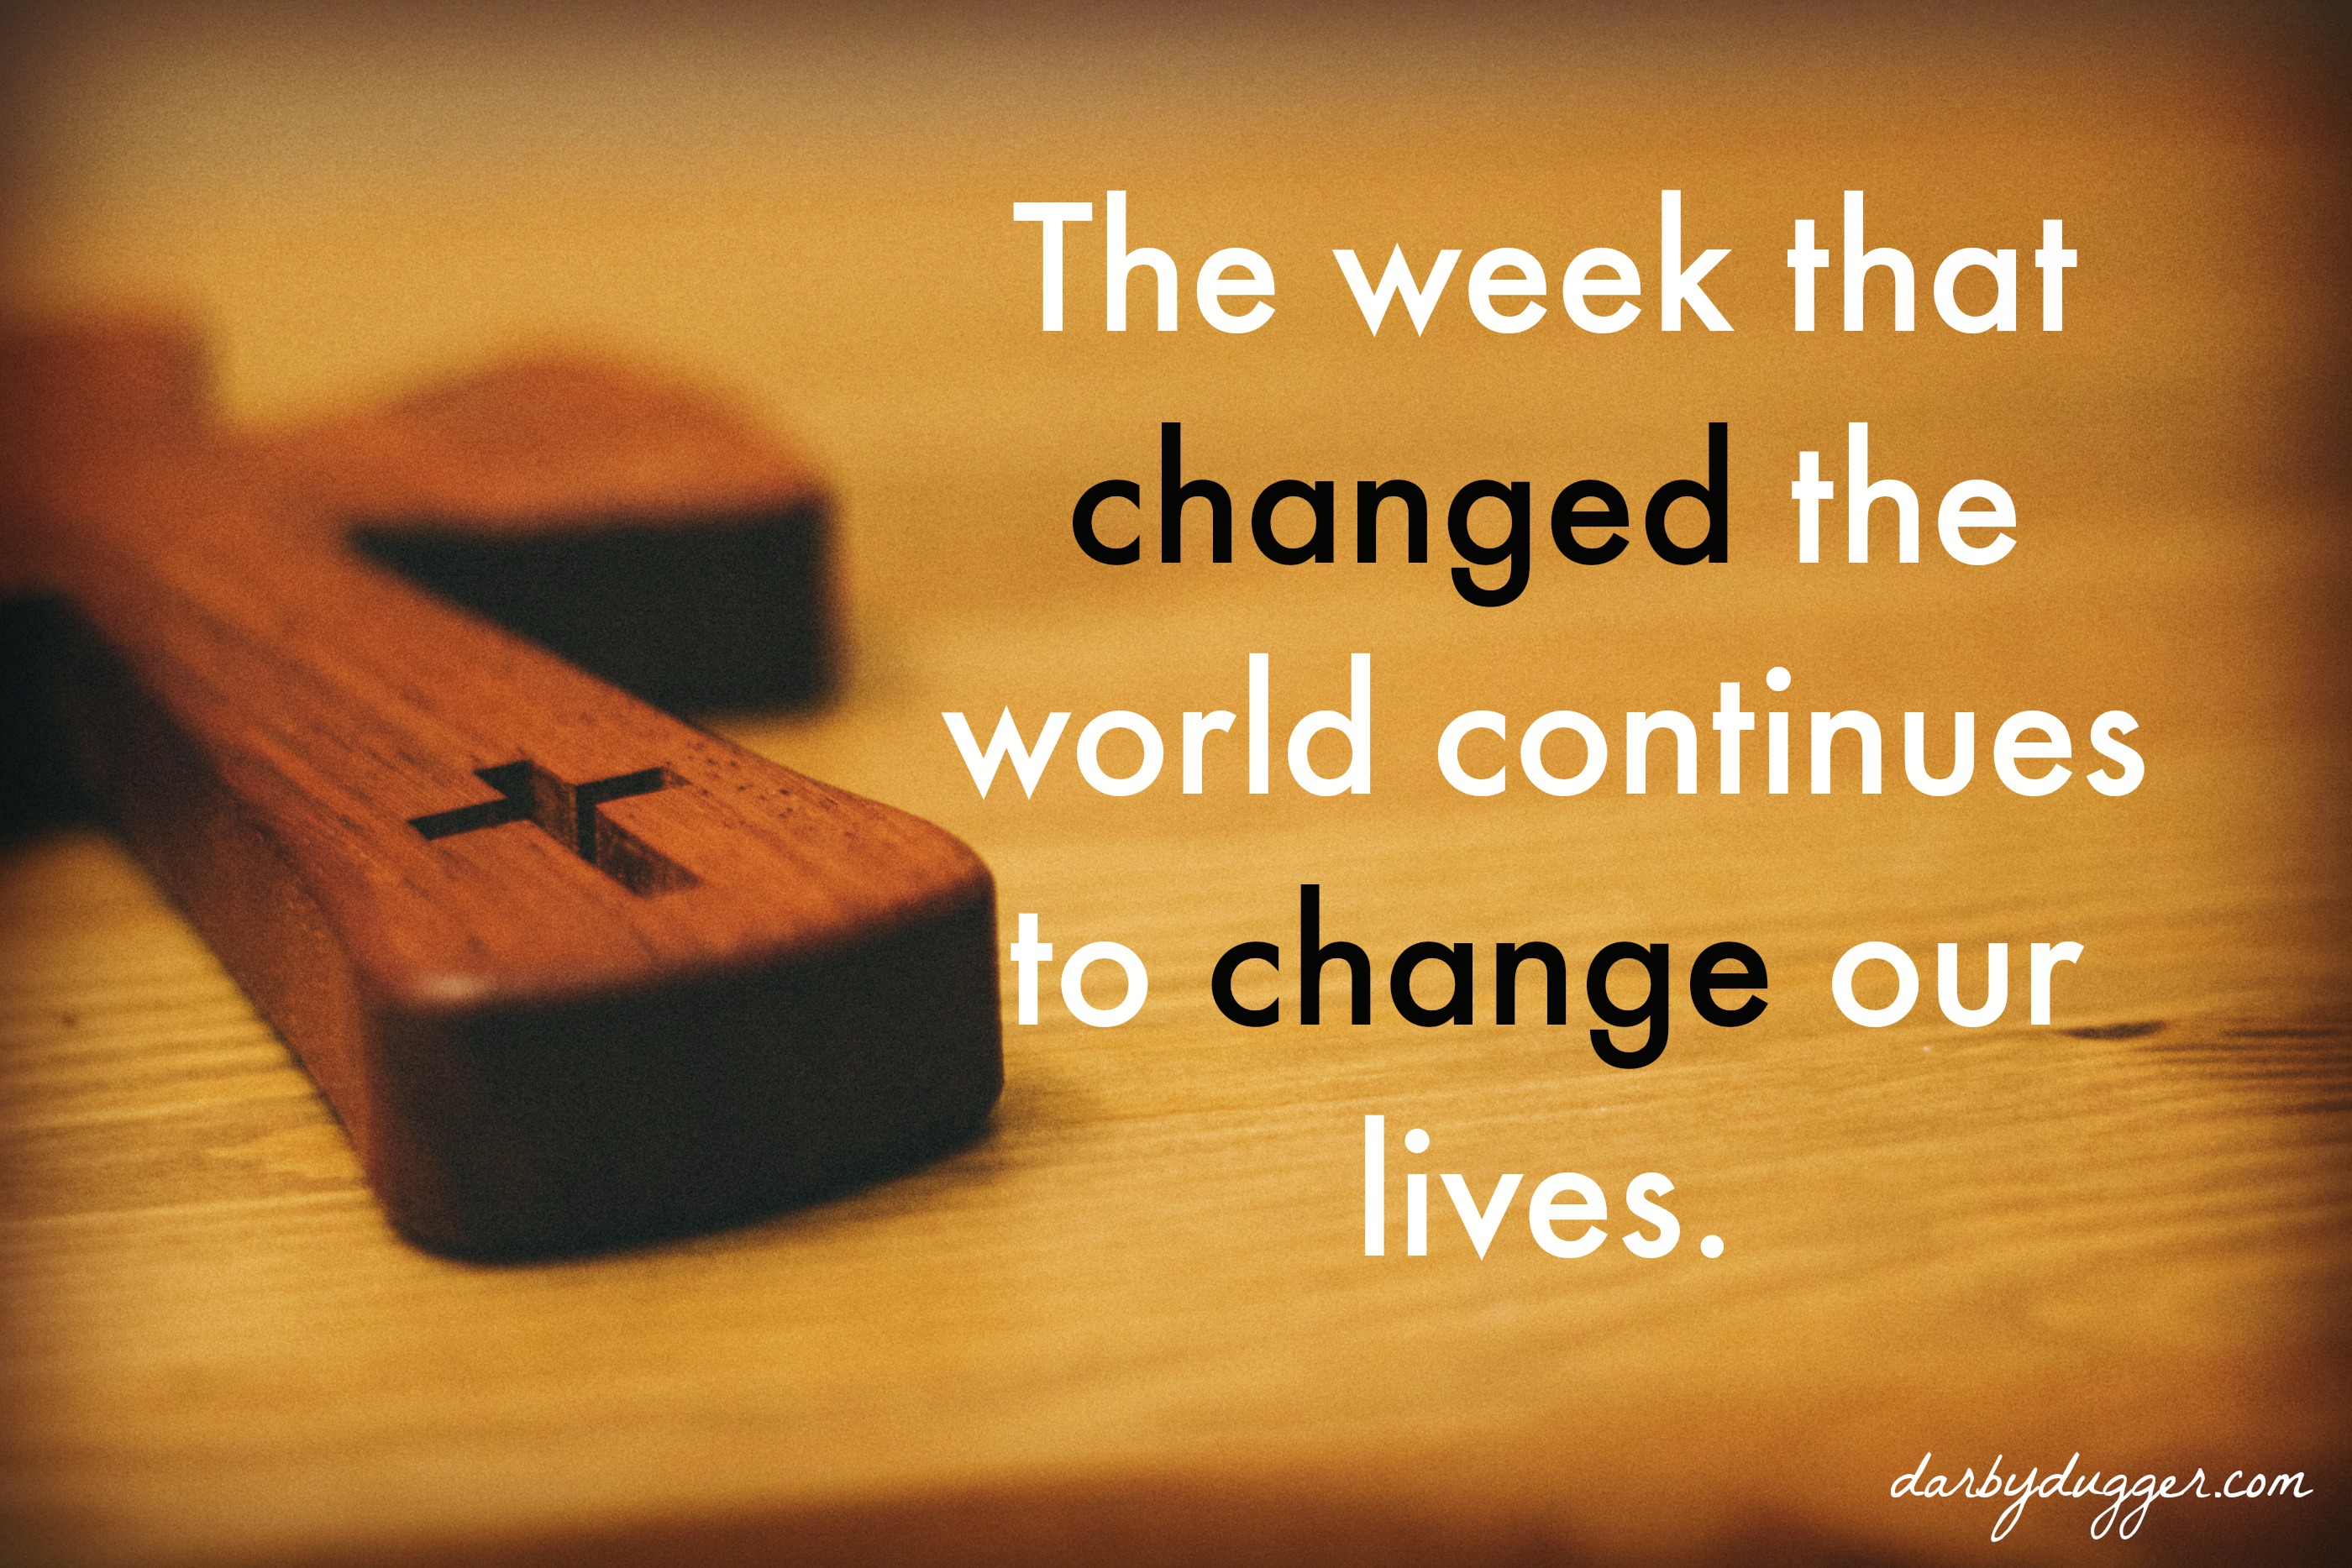 The week that changed the world continues to change our lives. — Darby